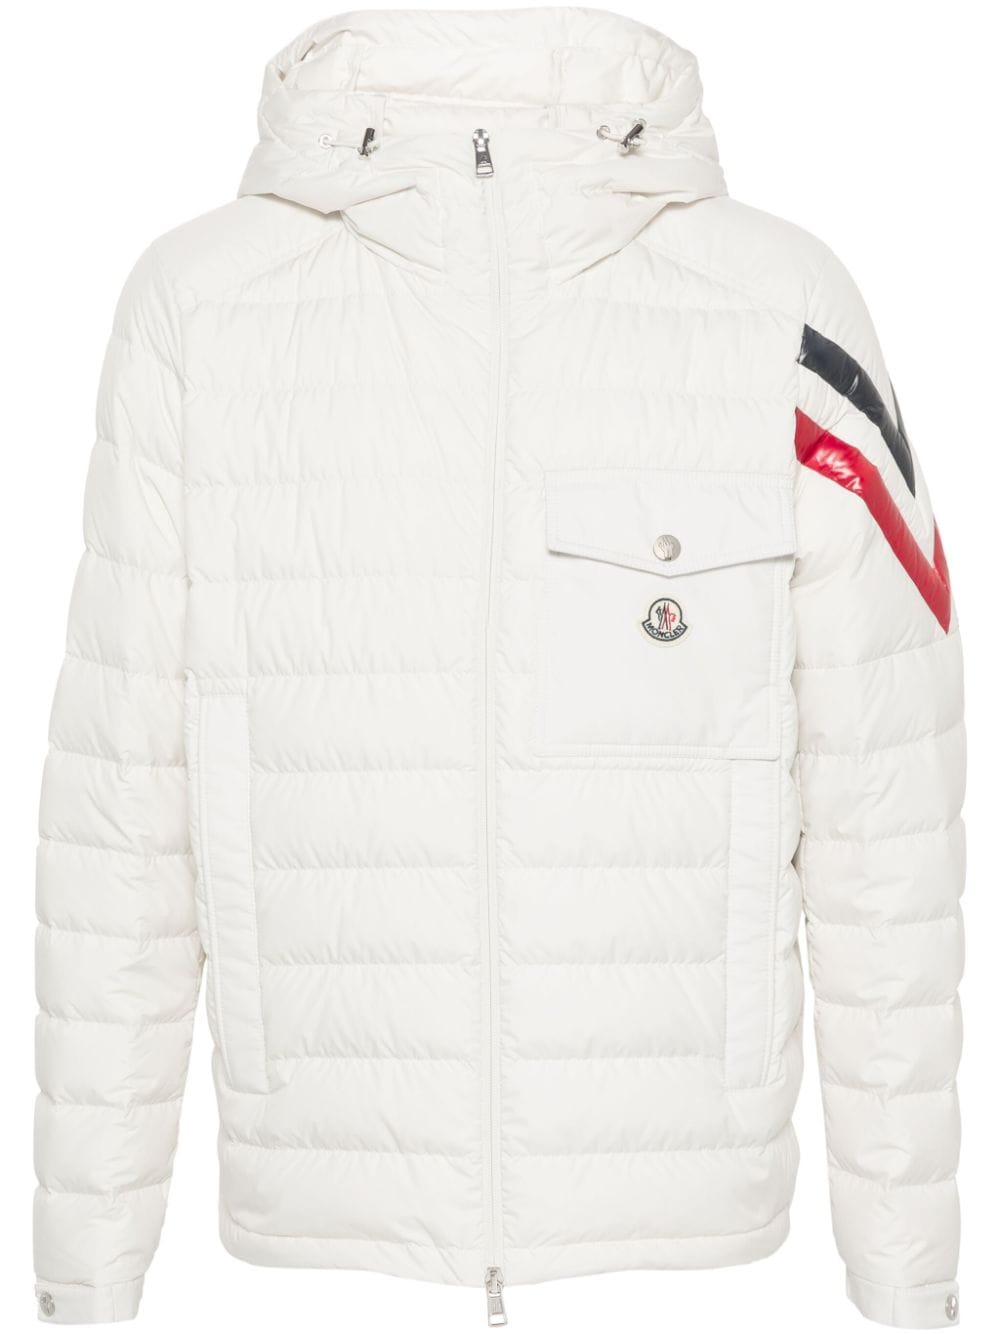 Berard quilted hooded jacket<BR/><BR/><BR/>